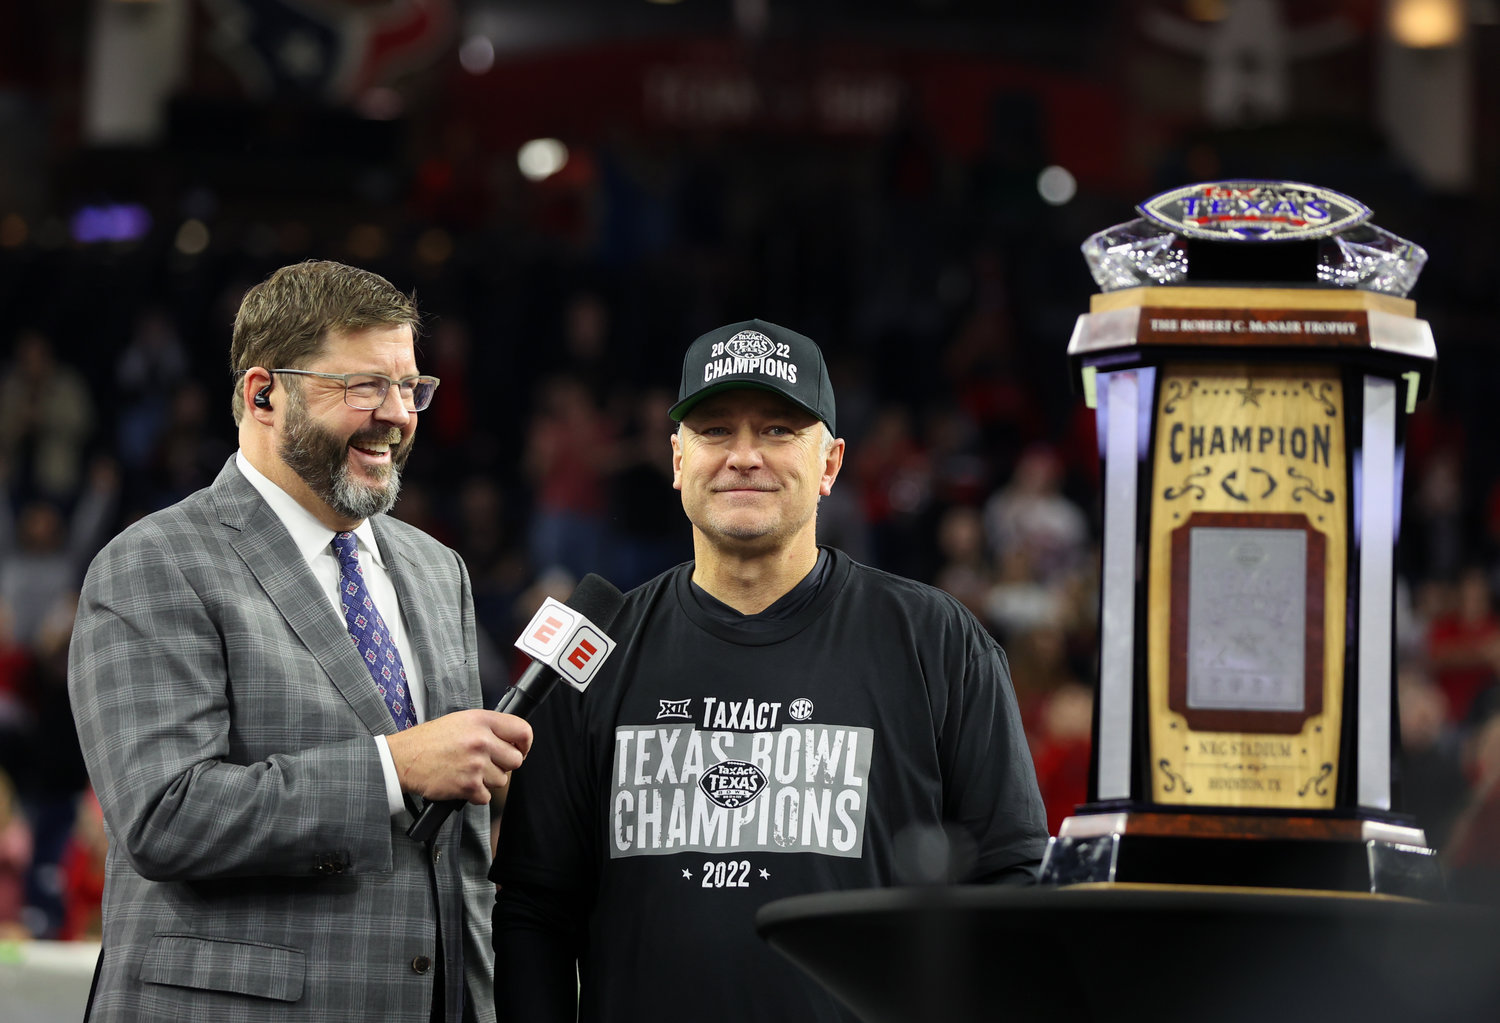 Texas Tech head coach Joey McGuire stands next to the TaxAct Texas Bowl trophy after a 42-25 win over Ole Miss on Dec. 28, 2022 in Houston.